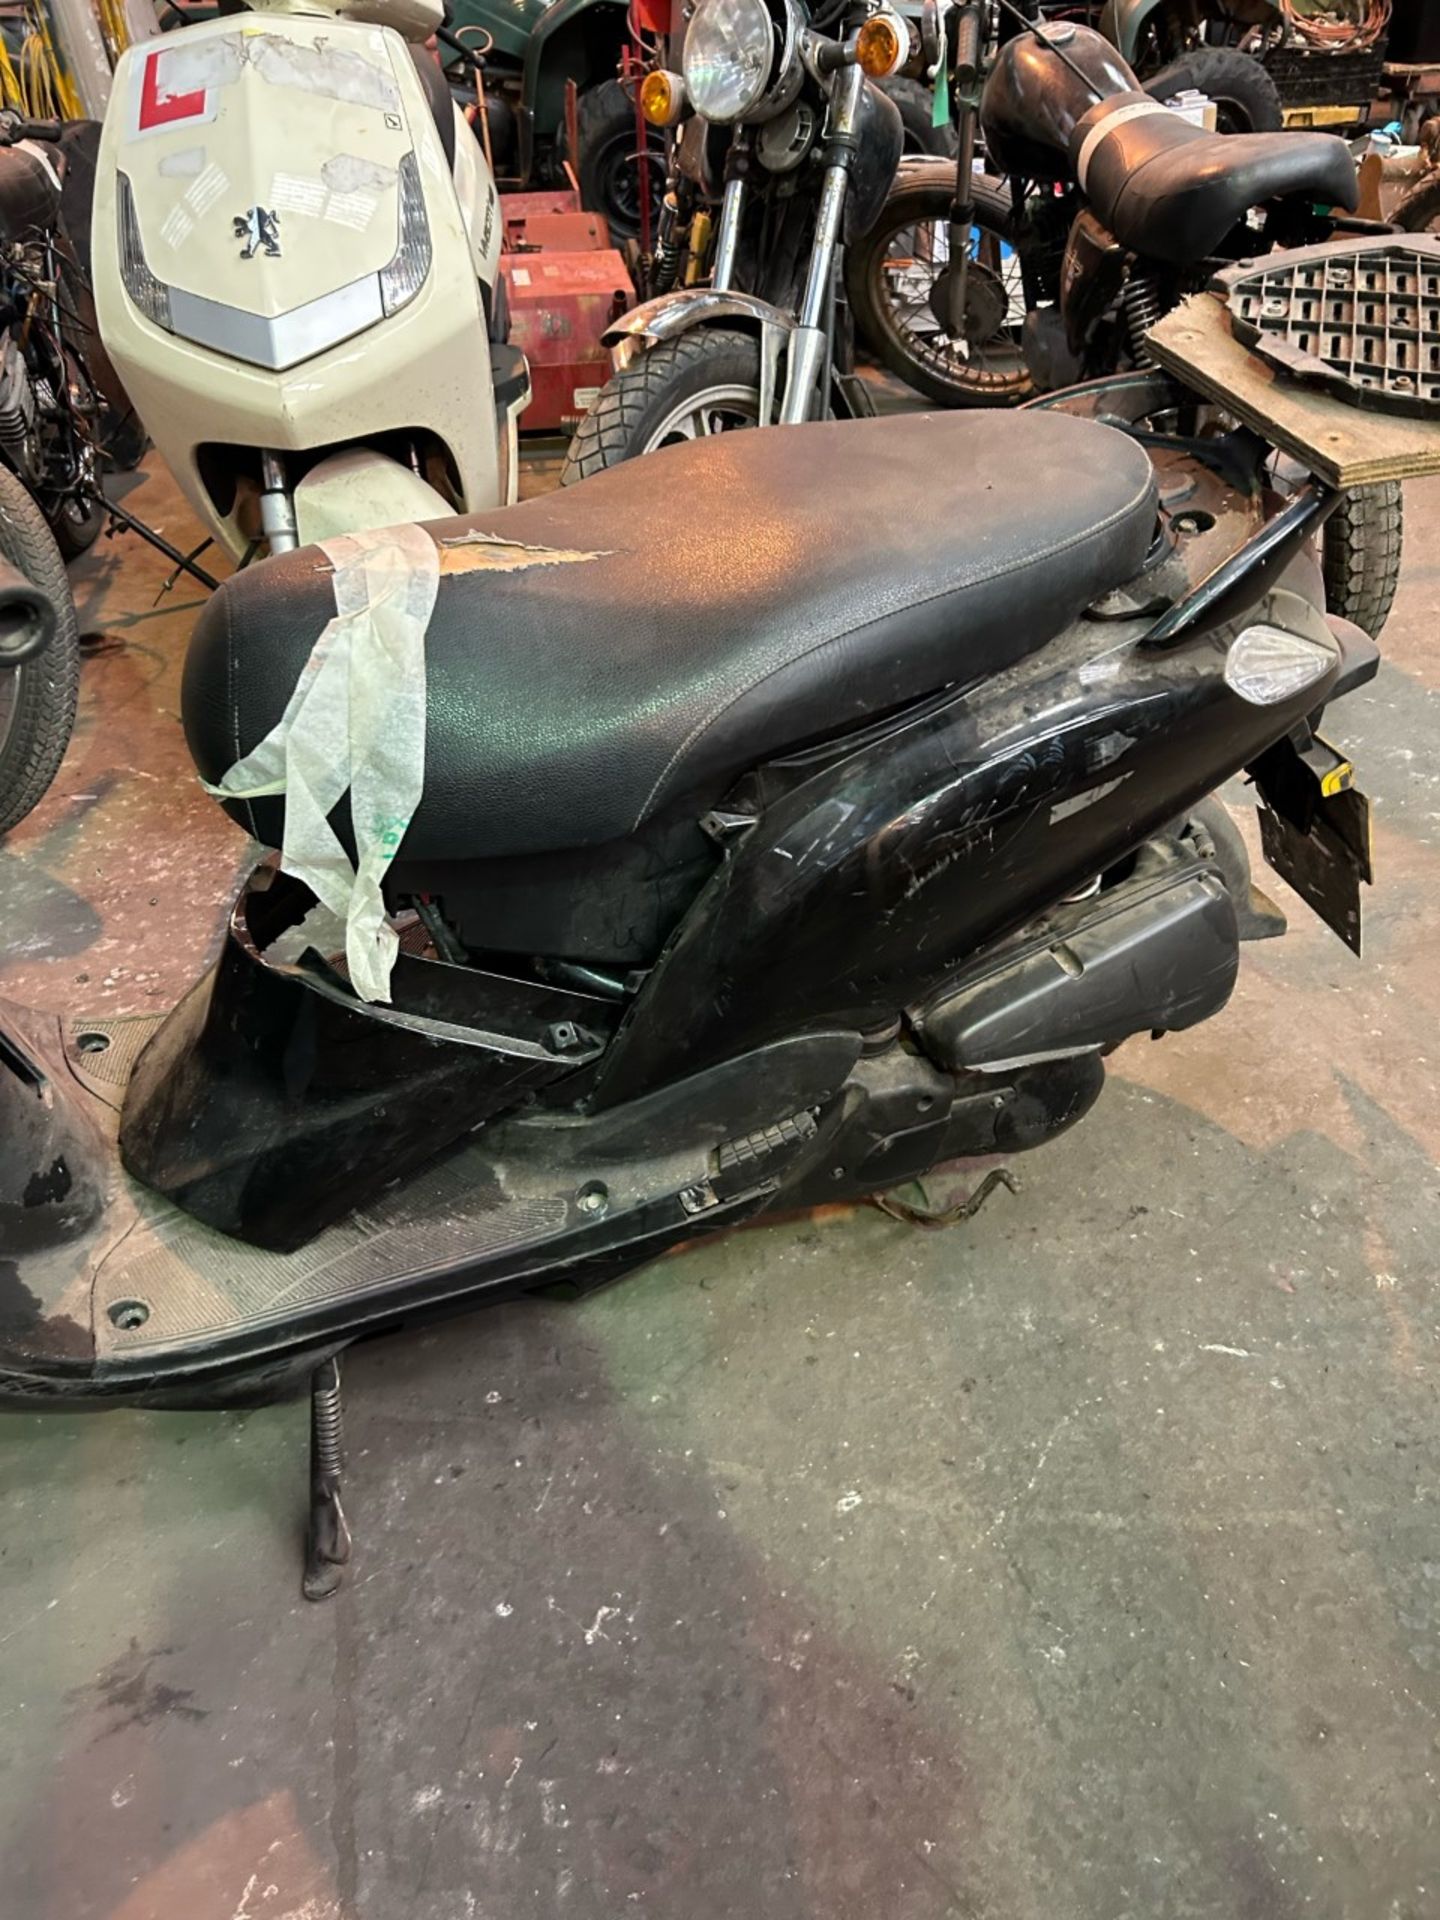 Yamaha xc115 S delight moped 2014. Non runner has cosmetic damage battery will need charging - Image 6 of 6